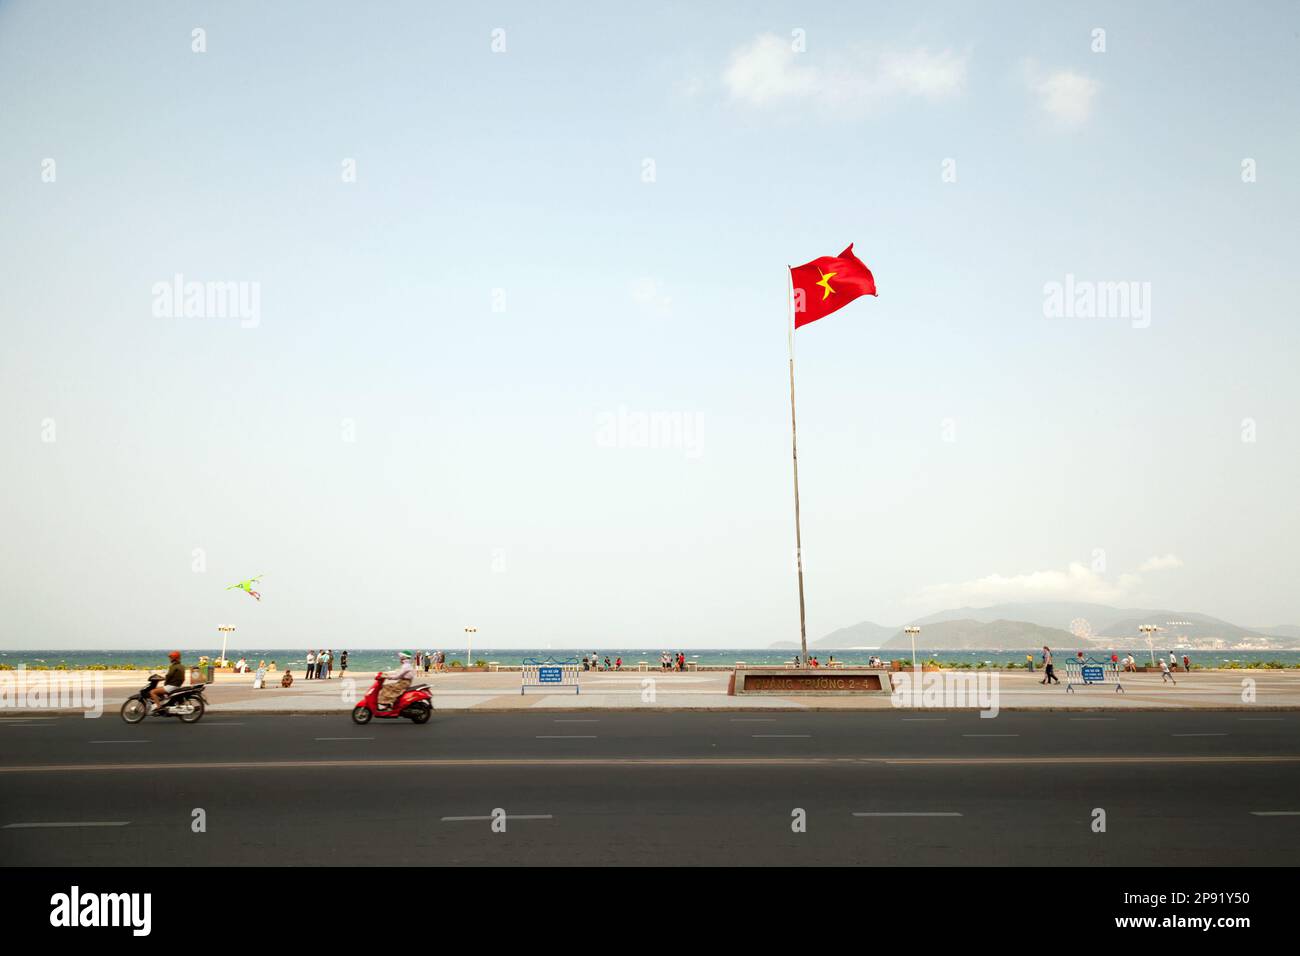 Cityscape of a city of Nha Trang with a red Vietnamese flag. Motorbikes driving along a beach road. Text on a flag socle: Square 2-4 Stock Photo